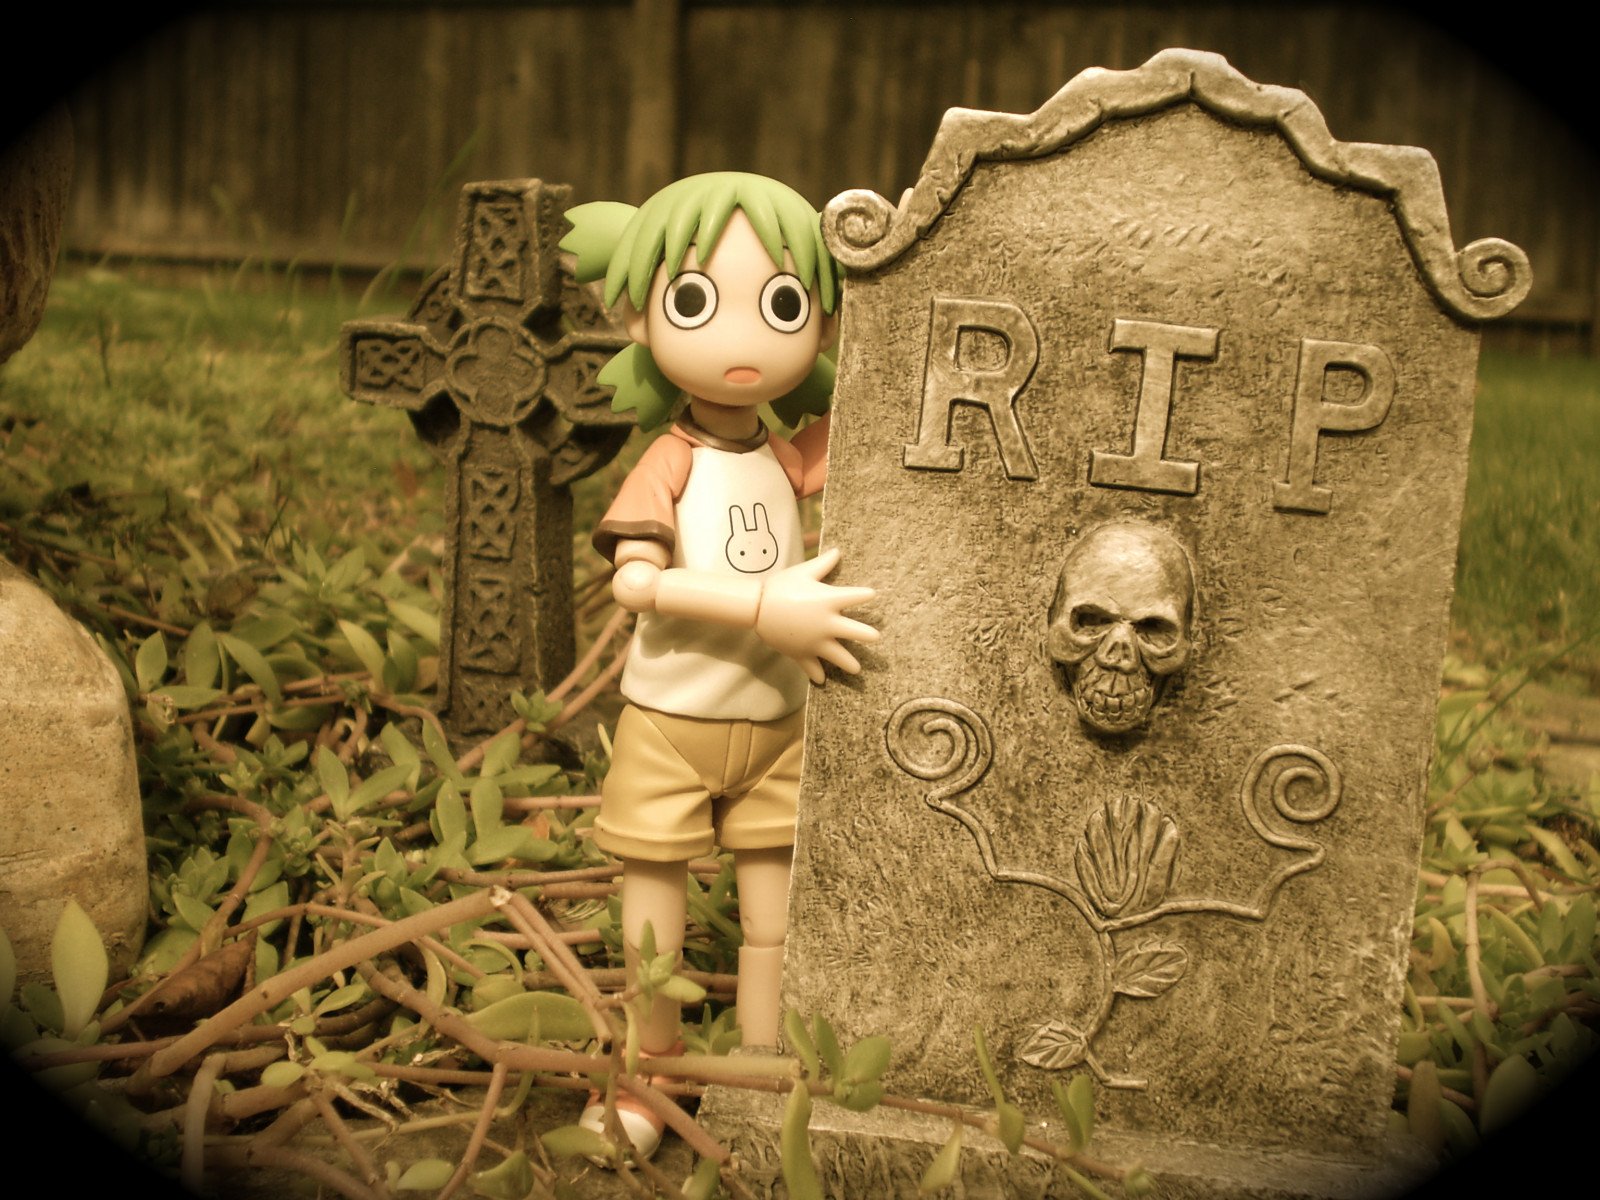 Wallpaper, holiday, cute, Halloween, girl, cemetery, grave, graveyard, garden, dead, Toy, outdoors, death, scary, vines, backyard, dof, action, rip, tomb, manga, eerie, spooky, kawaii, figure, horror, iphoto, ghostly, tombstones, koiwai, fright